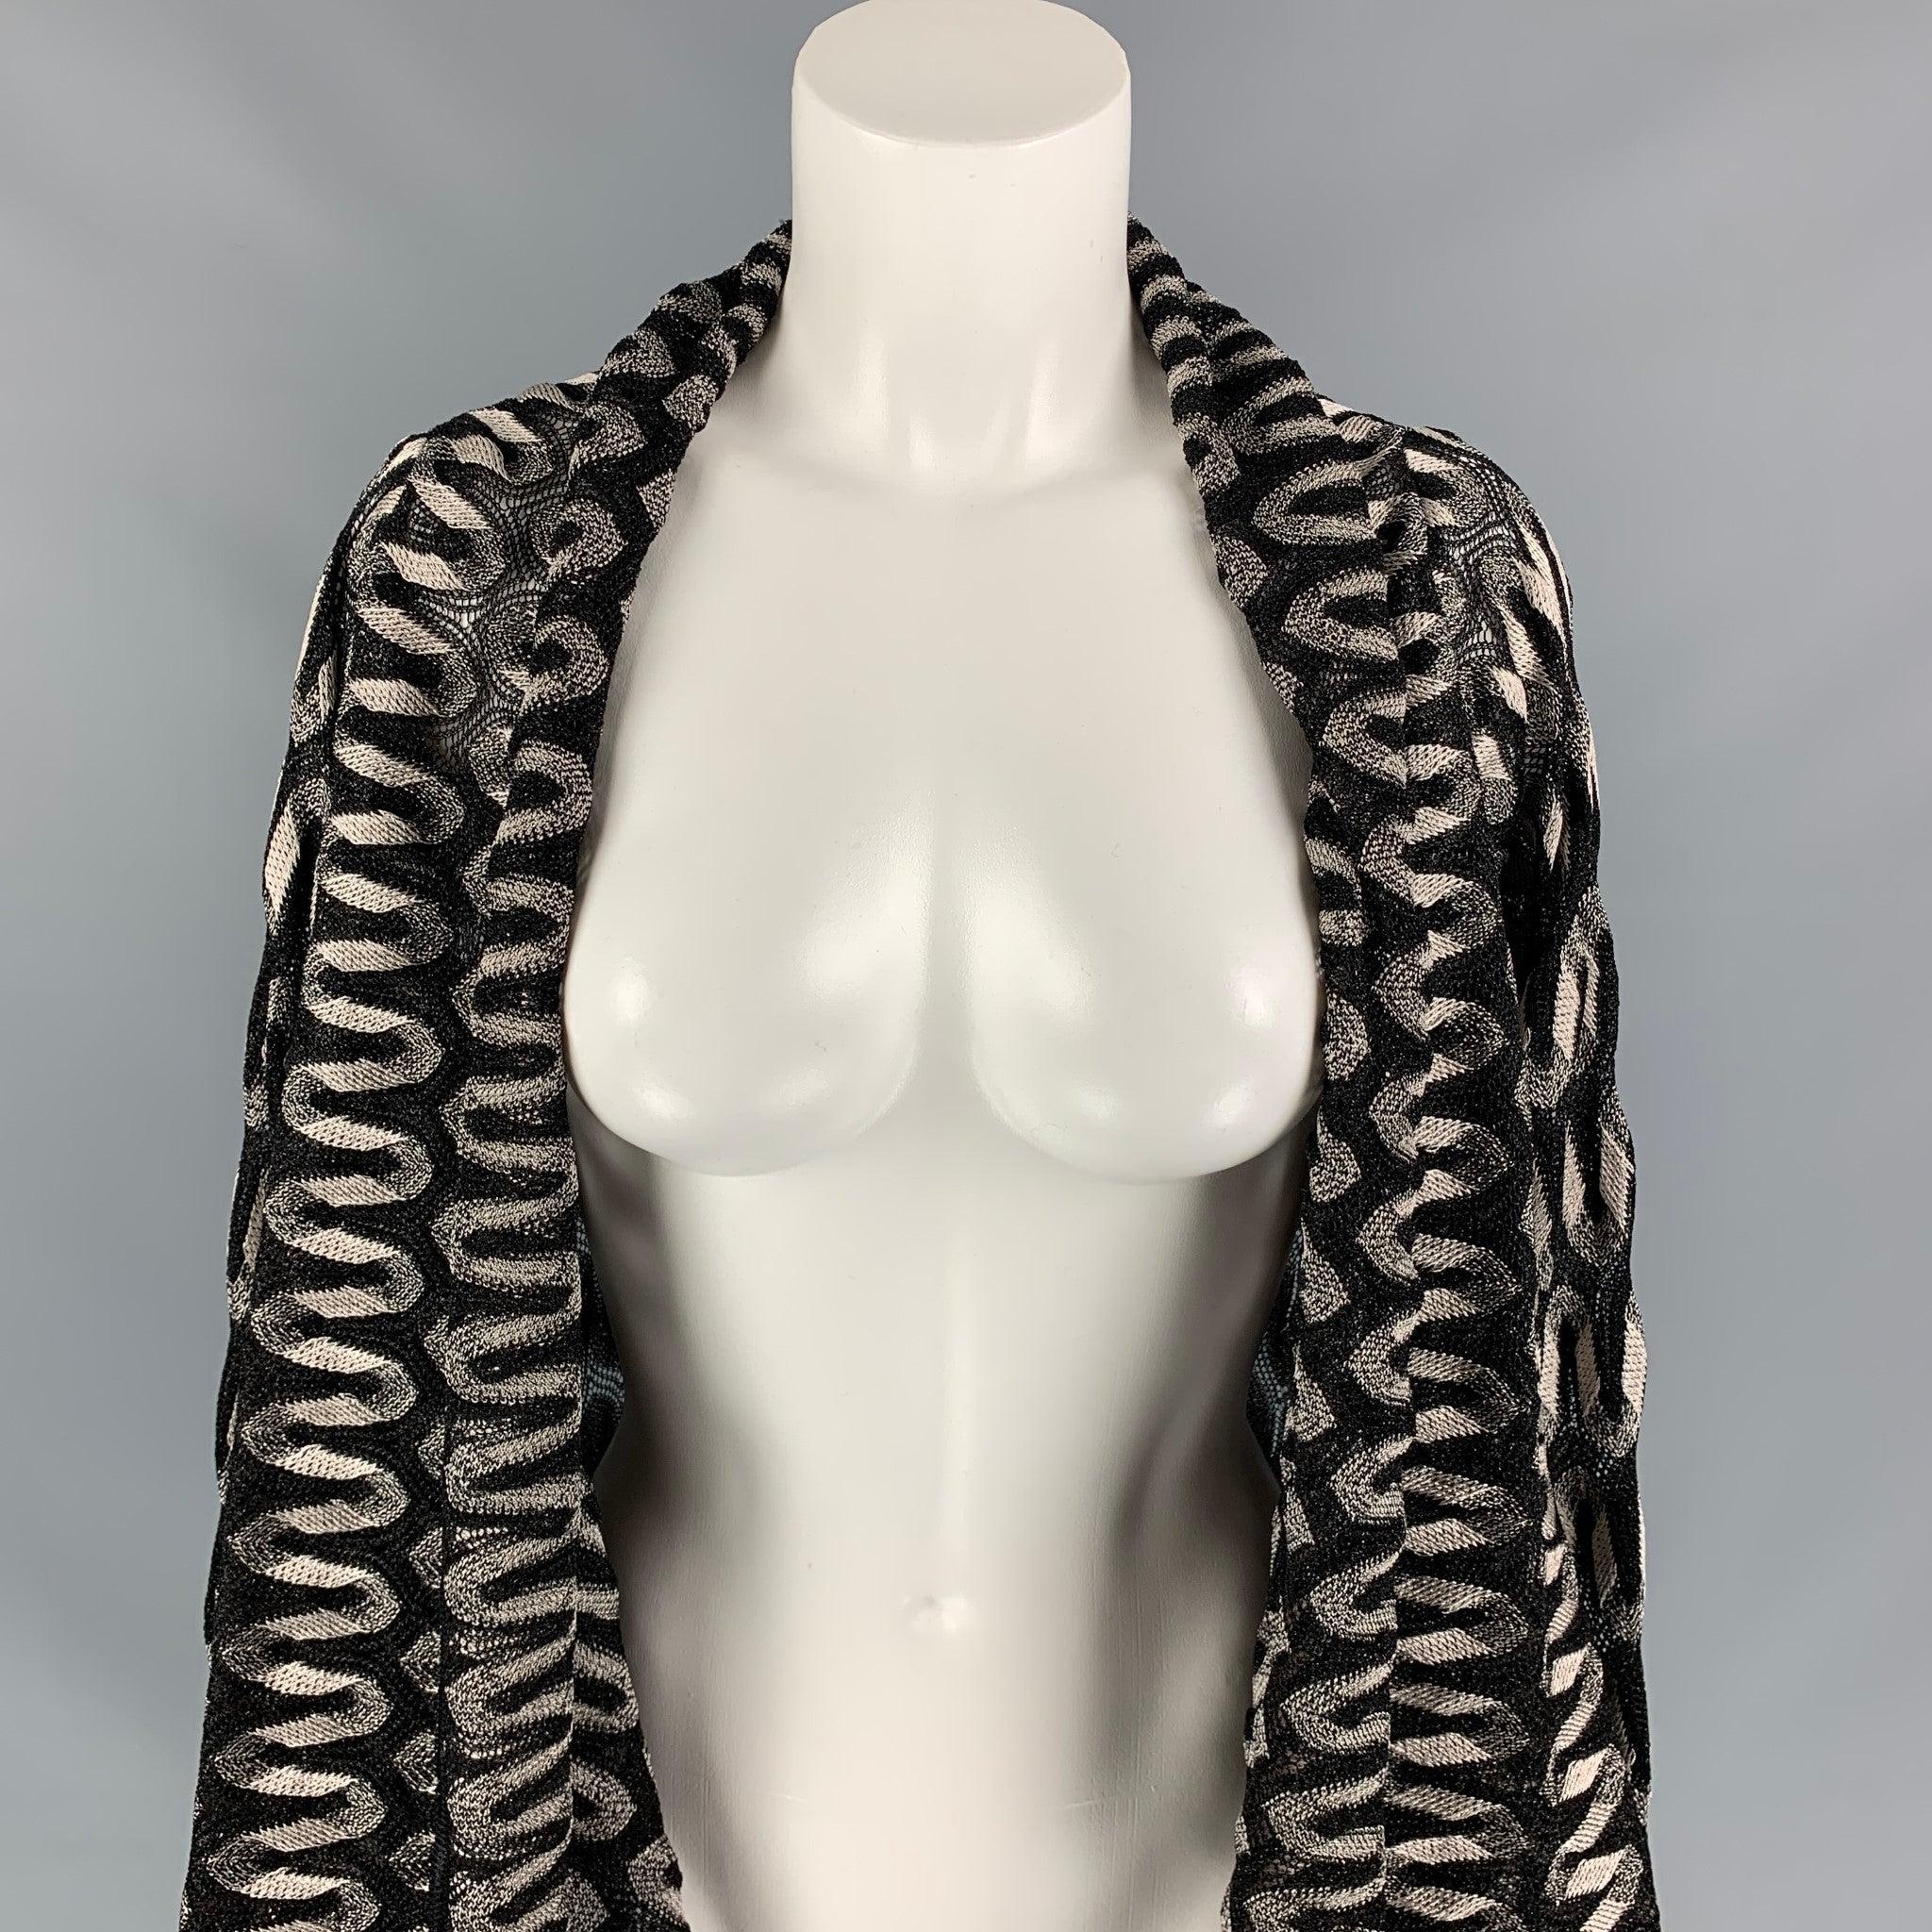 MISSONI coat comes in a black & silver metallic knitted viscose blend featuring long sleeve and a open front.
Very Good
Pre-Owned Condition. 

Marked:  42 

Measurements: 
 
Shoulder: 15 inches Bust: 38 inches Sleeve: 31 inches Length: 39 inches 
 
